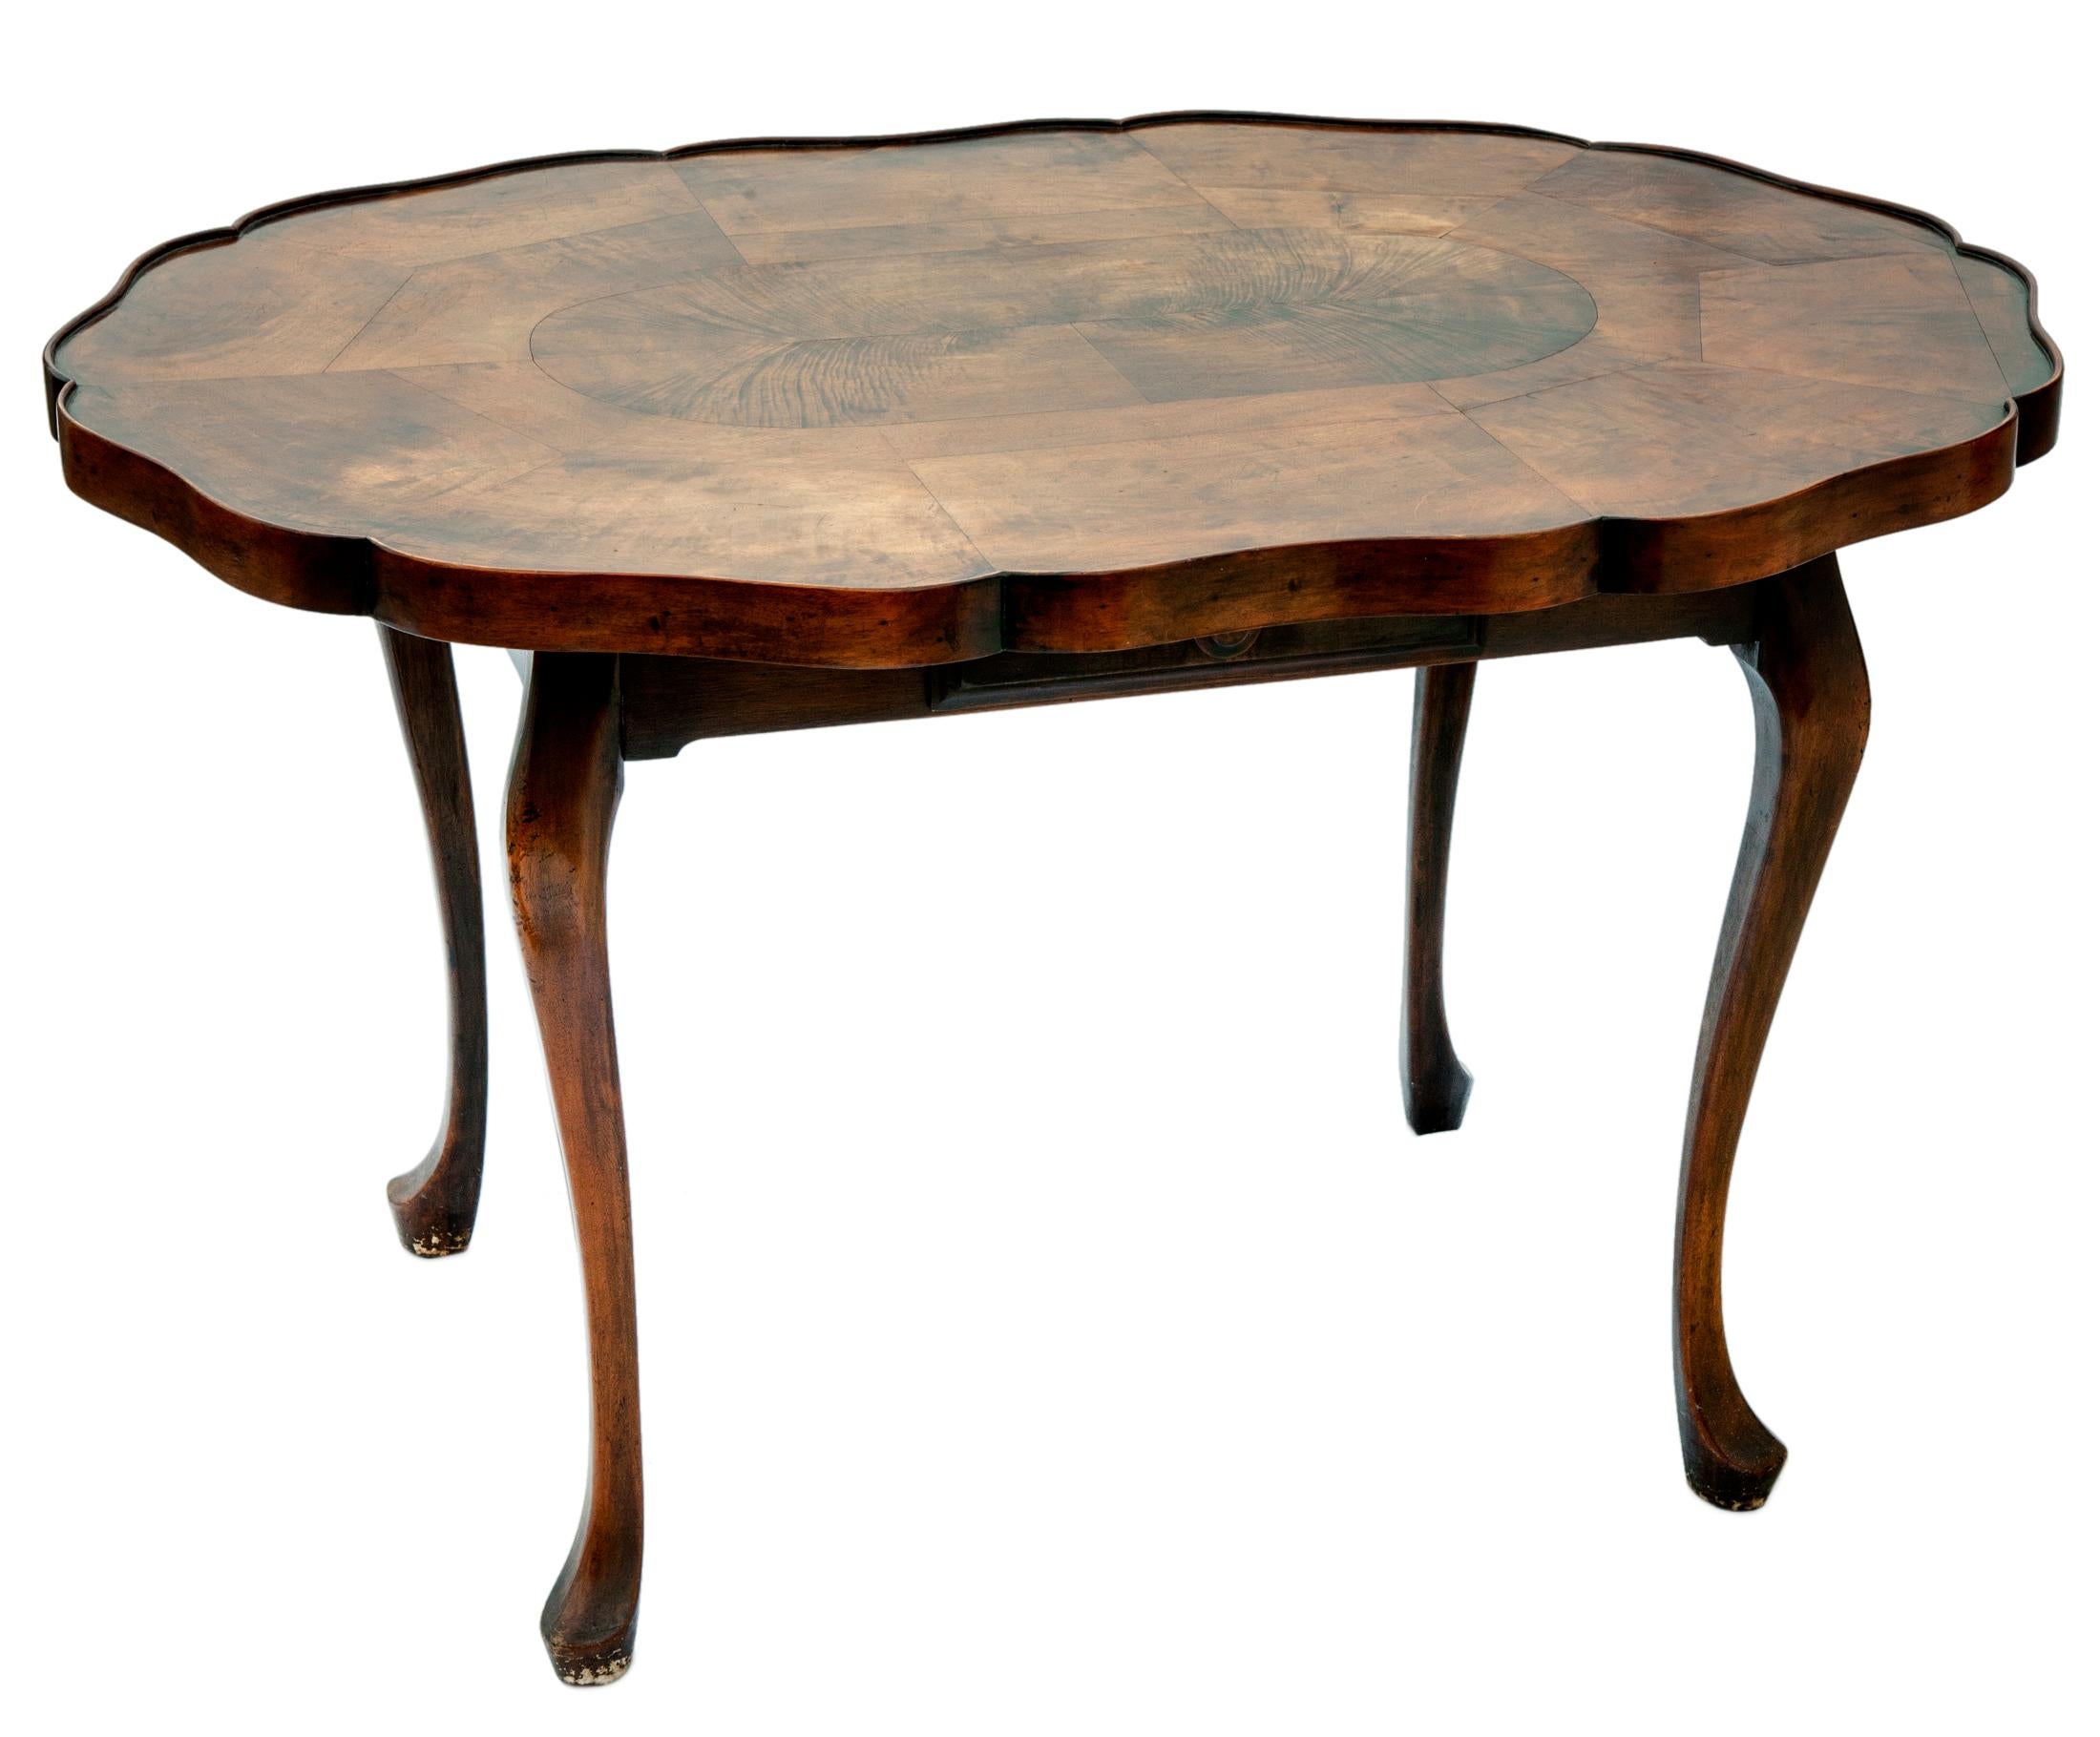 Burl Walnut Center Table/ Writing Desk
Stunning Queen Anne style center table/writing table hand made in walnut with dramatic burled venneers.
Fine craftsmanship with a 1.75